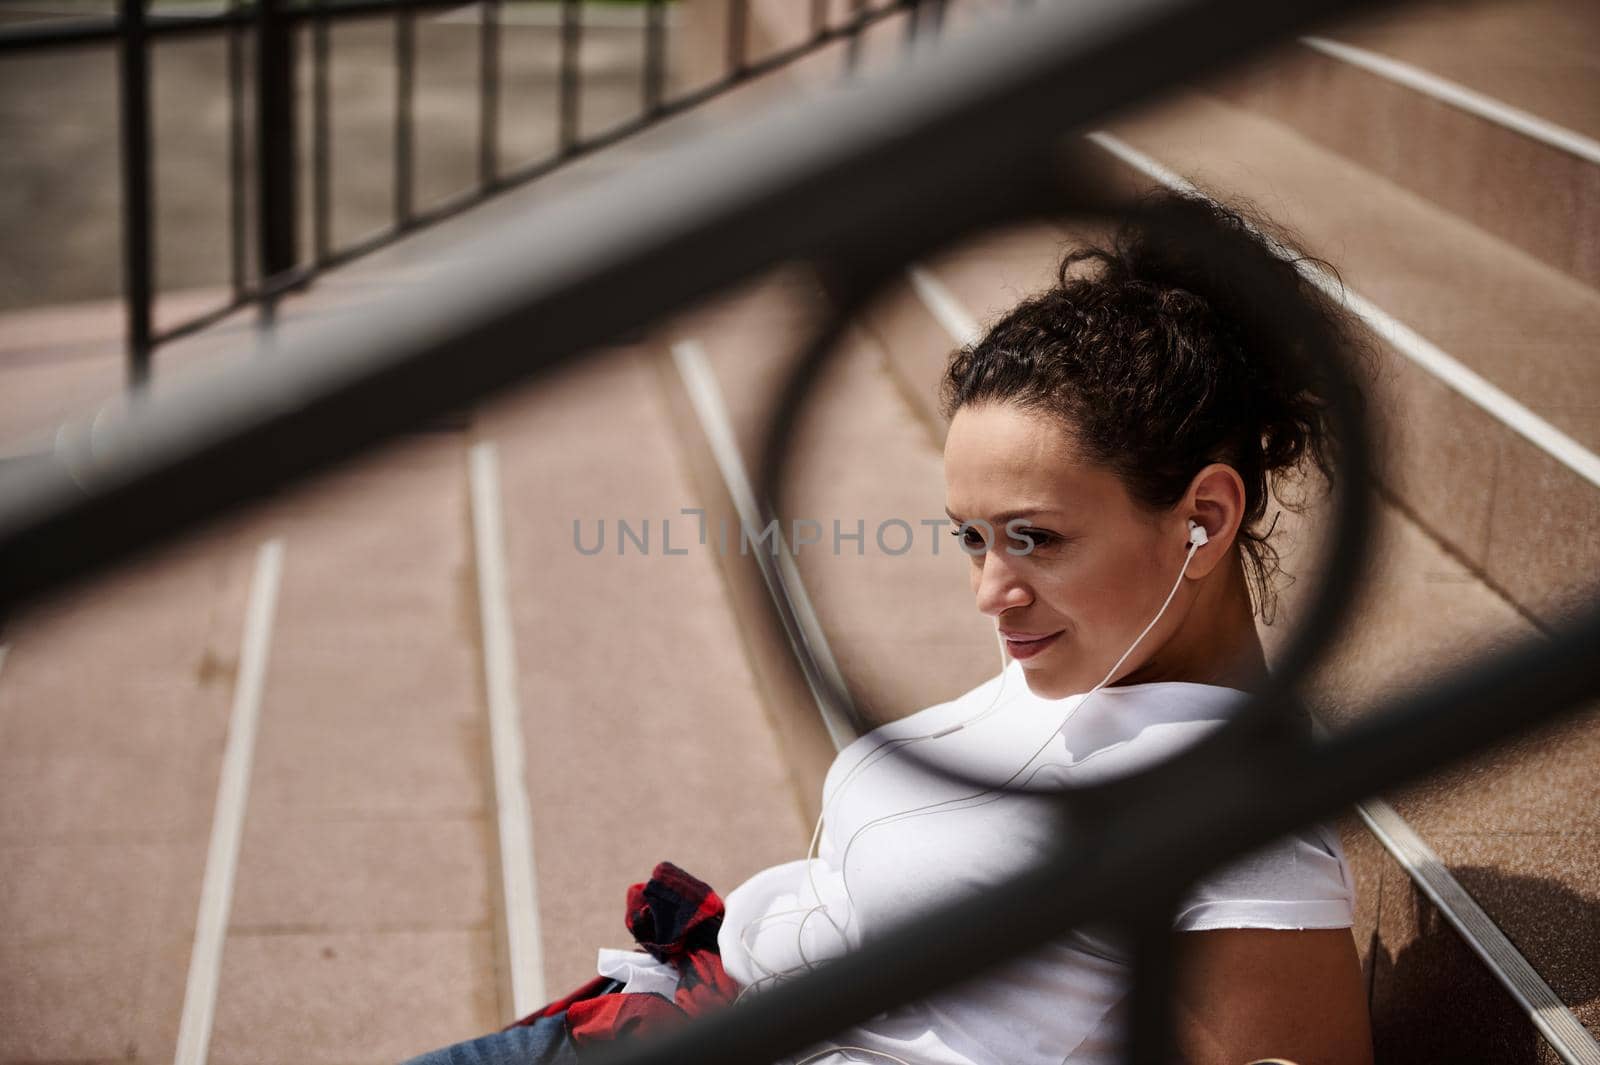 Closeup view through the railing of an attractive Latin American woman sitting on the steps of an unrecognizable building